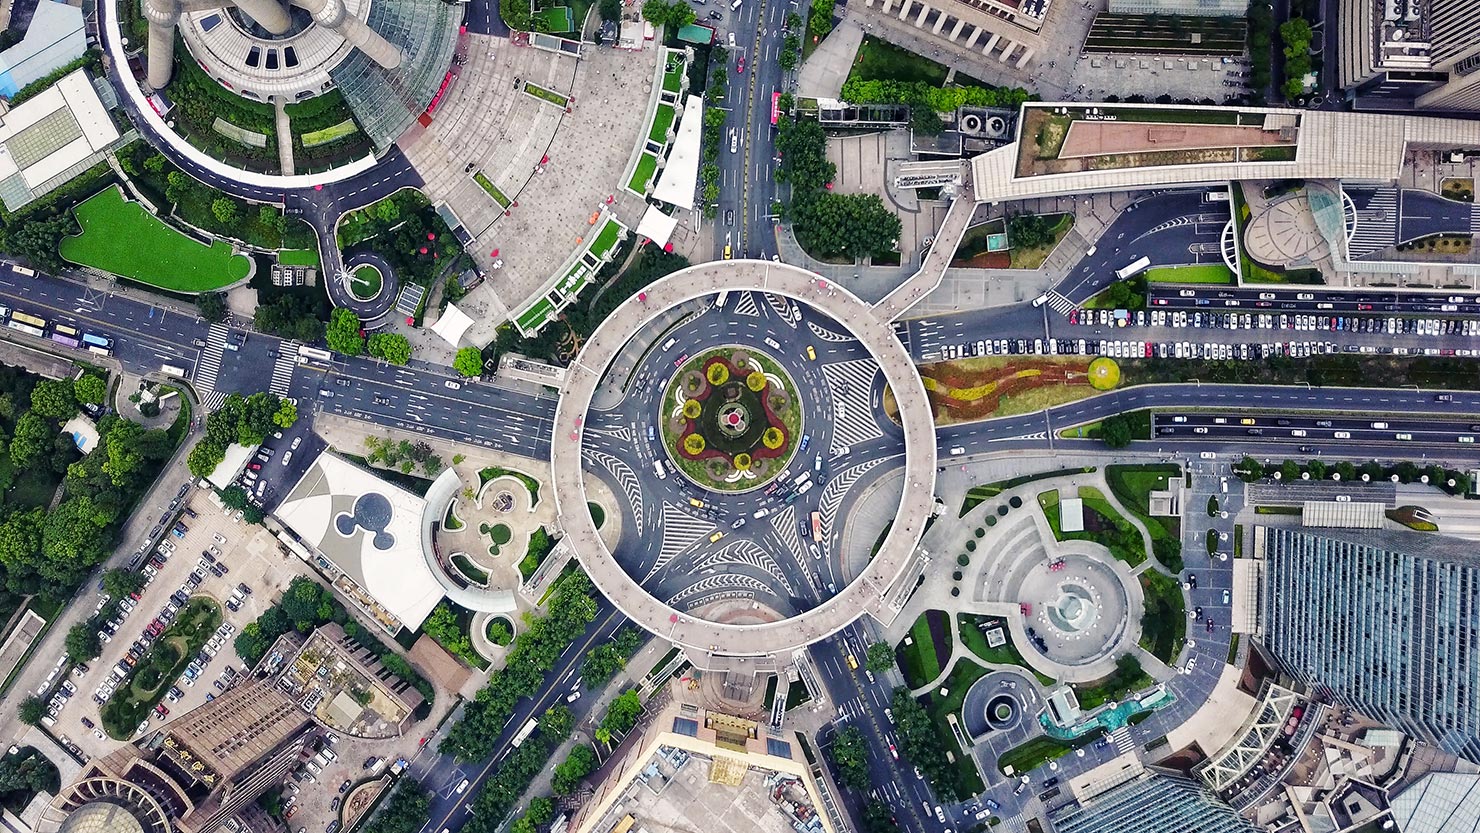 Shanghai China Pudong Traffic Circle Roads Drone Aerial Parasail Photography Licensed Operator FAA Part 107 CAA PfCO Commercial Operations Hire Commission Paul Reiffer Professional